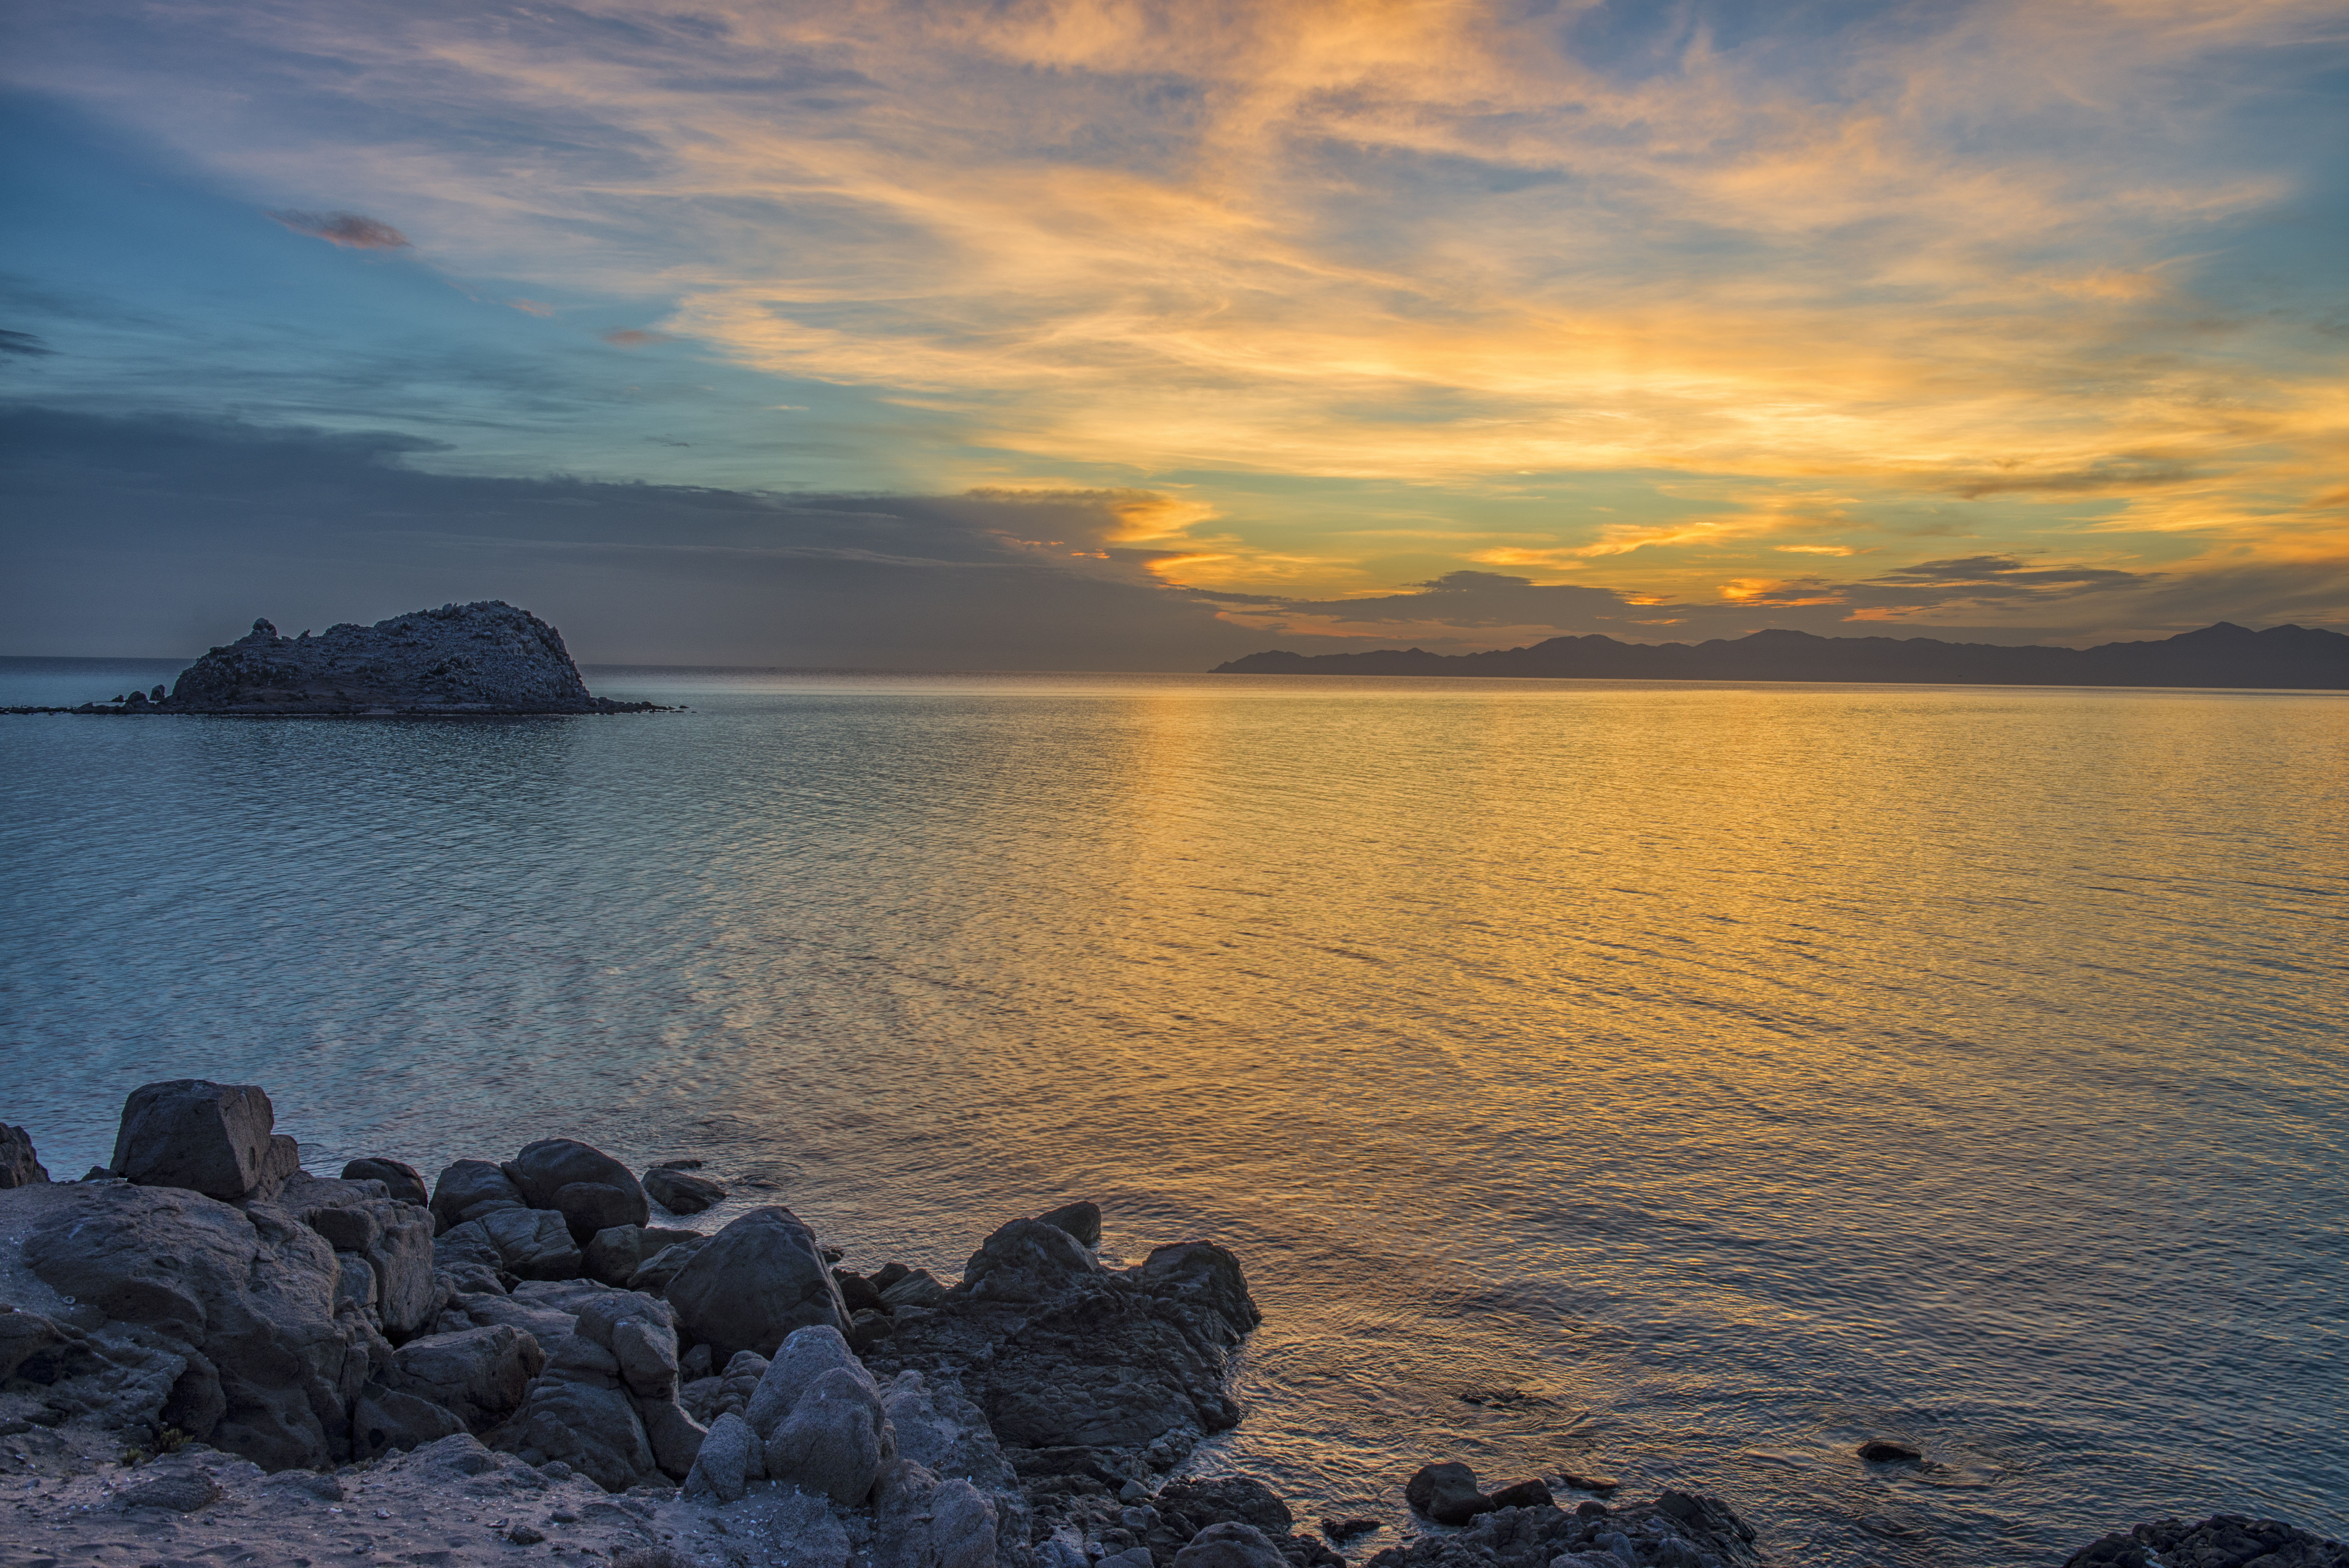 Colourful sunset by rocks and ocean at Ensenada in Mexico. 